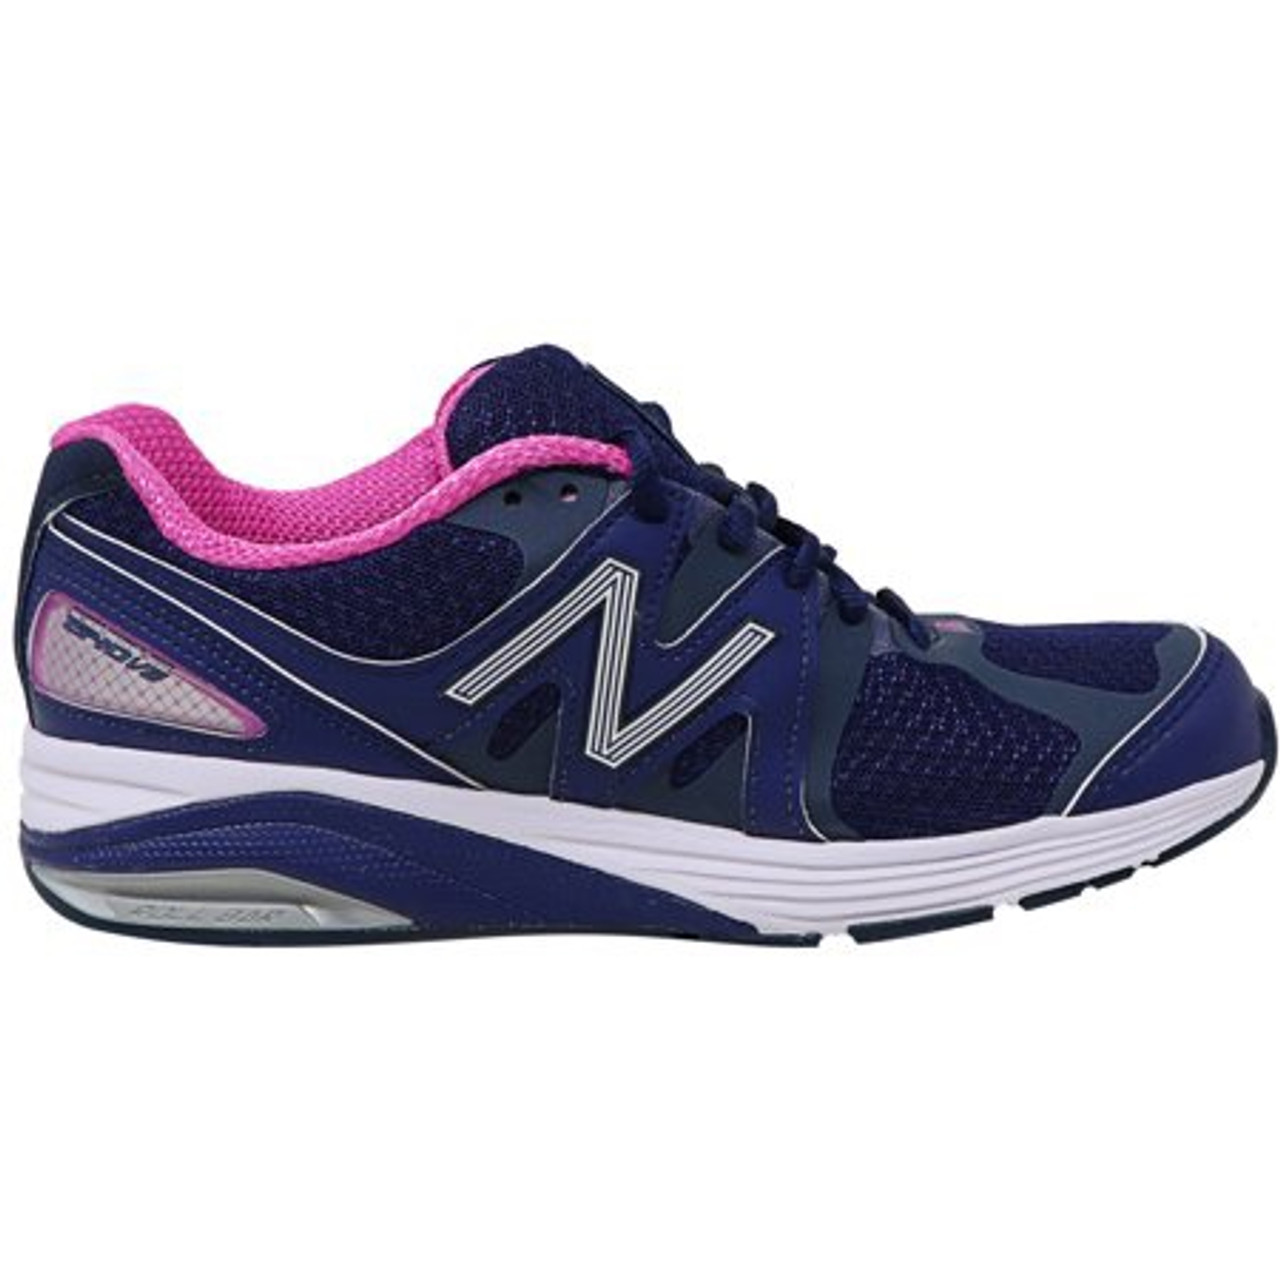 New Women's 1540v2 in Purple with Pink Daniels Shoes